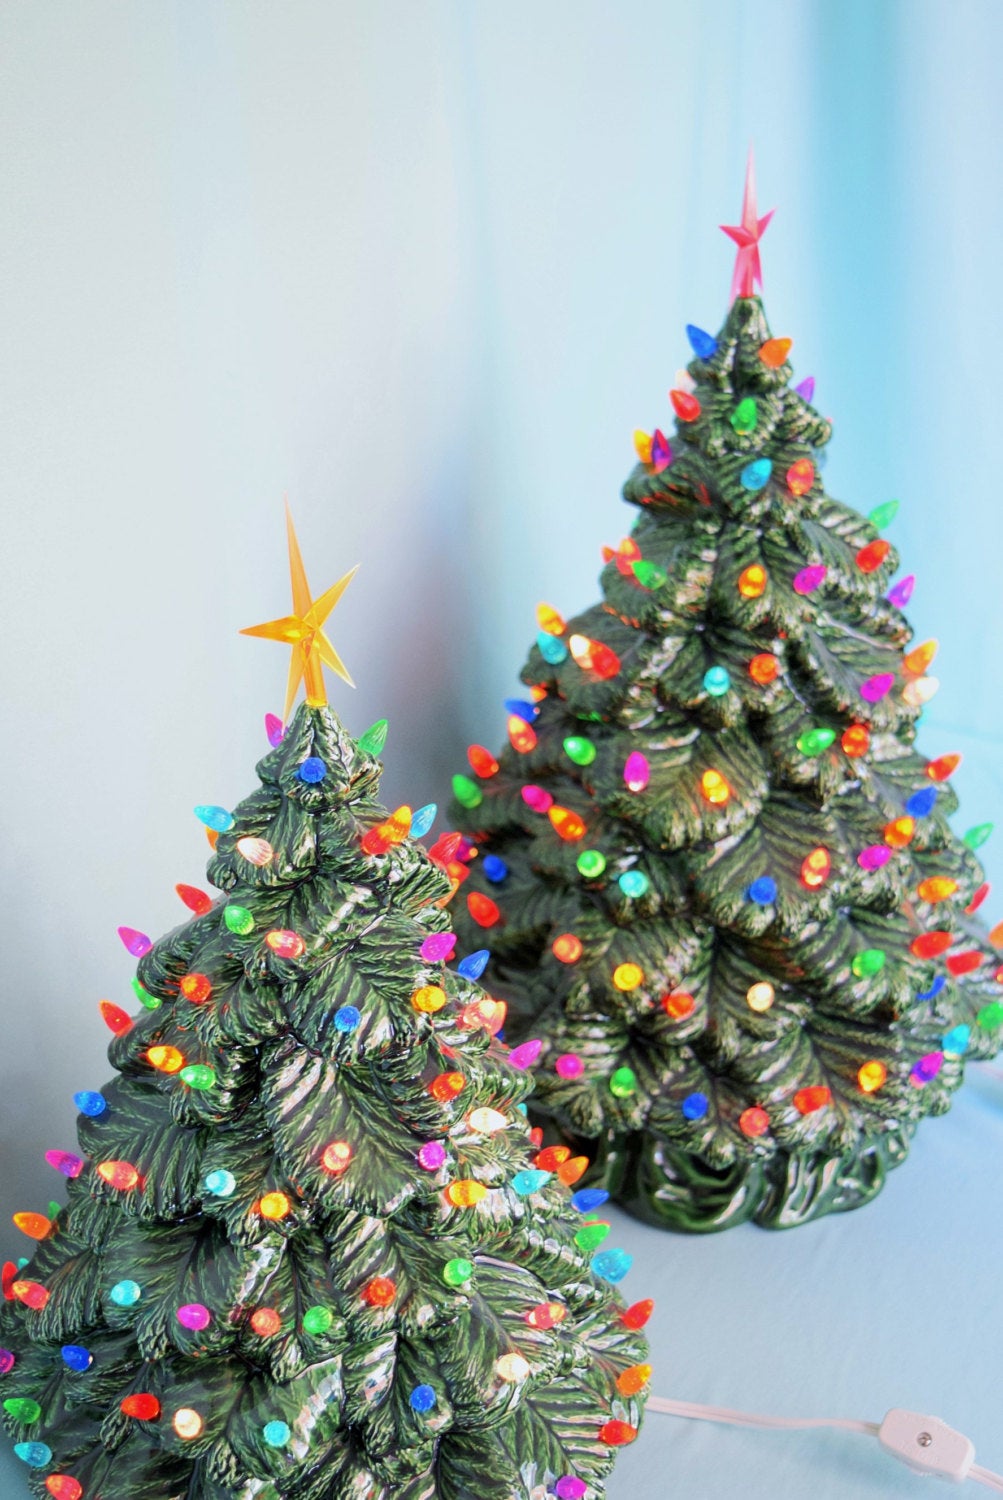 Lighted Ceramic Christmas Tree - Electric with Multi-Colored Lights - 16 inch